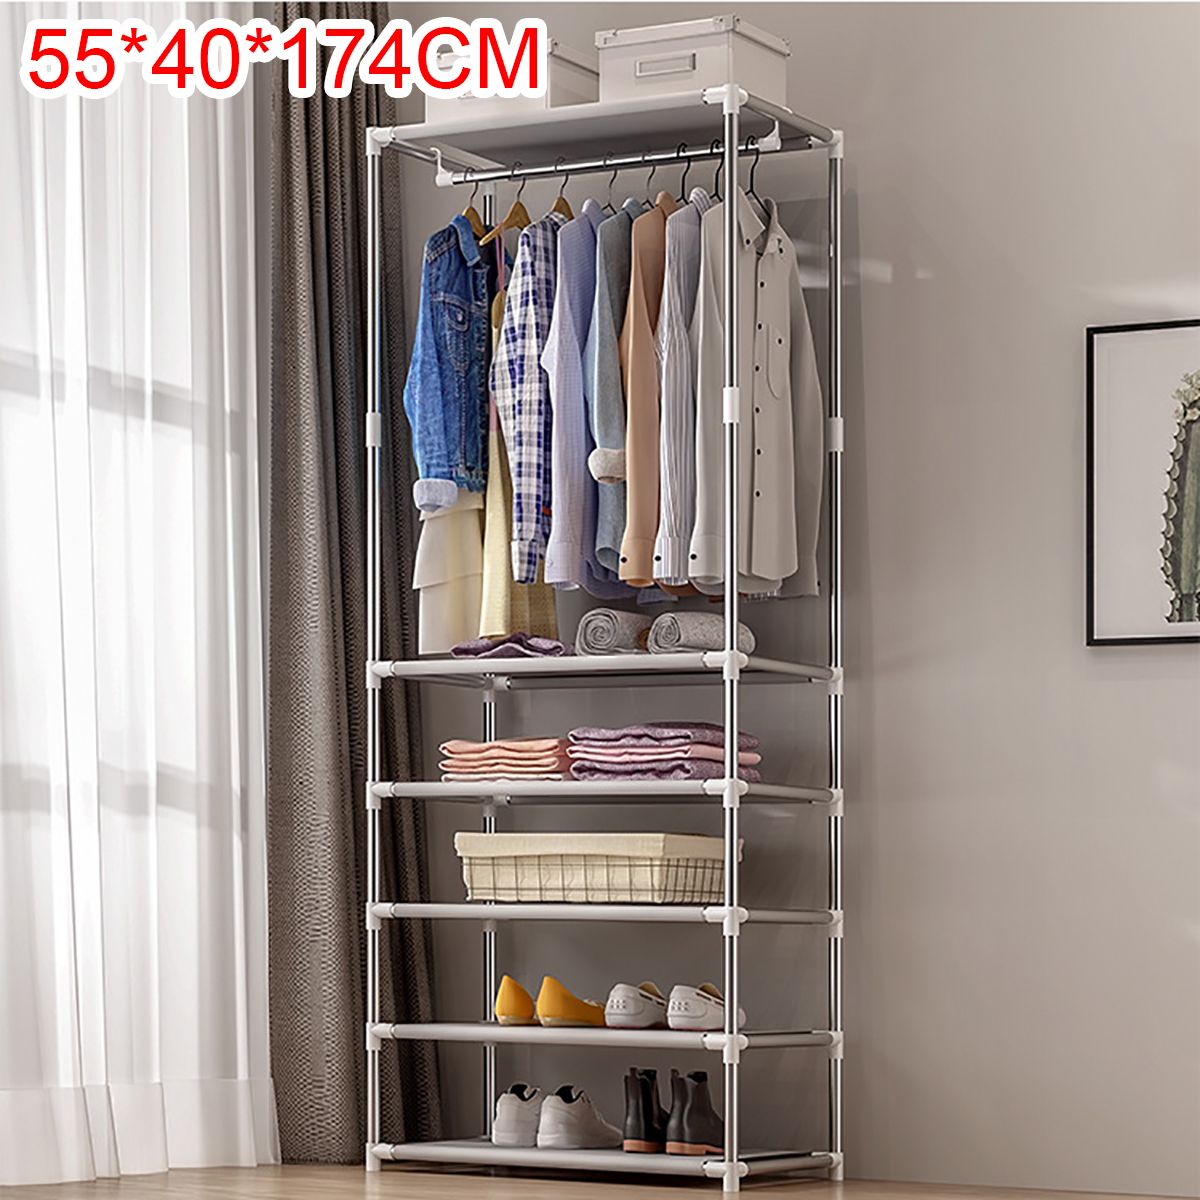 Simple Coat Rack Floor Clothes Hangers Creative Clothing Rack Shelf Easy Assembly Bedroom Hanging Clothing Racks Fashion Home Decorations 6